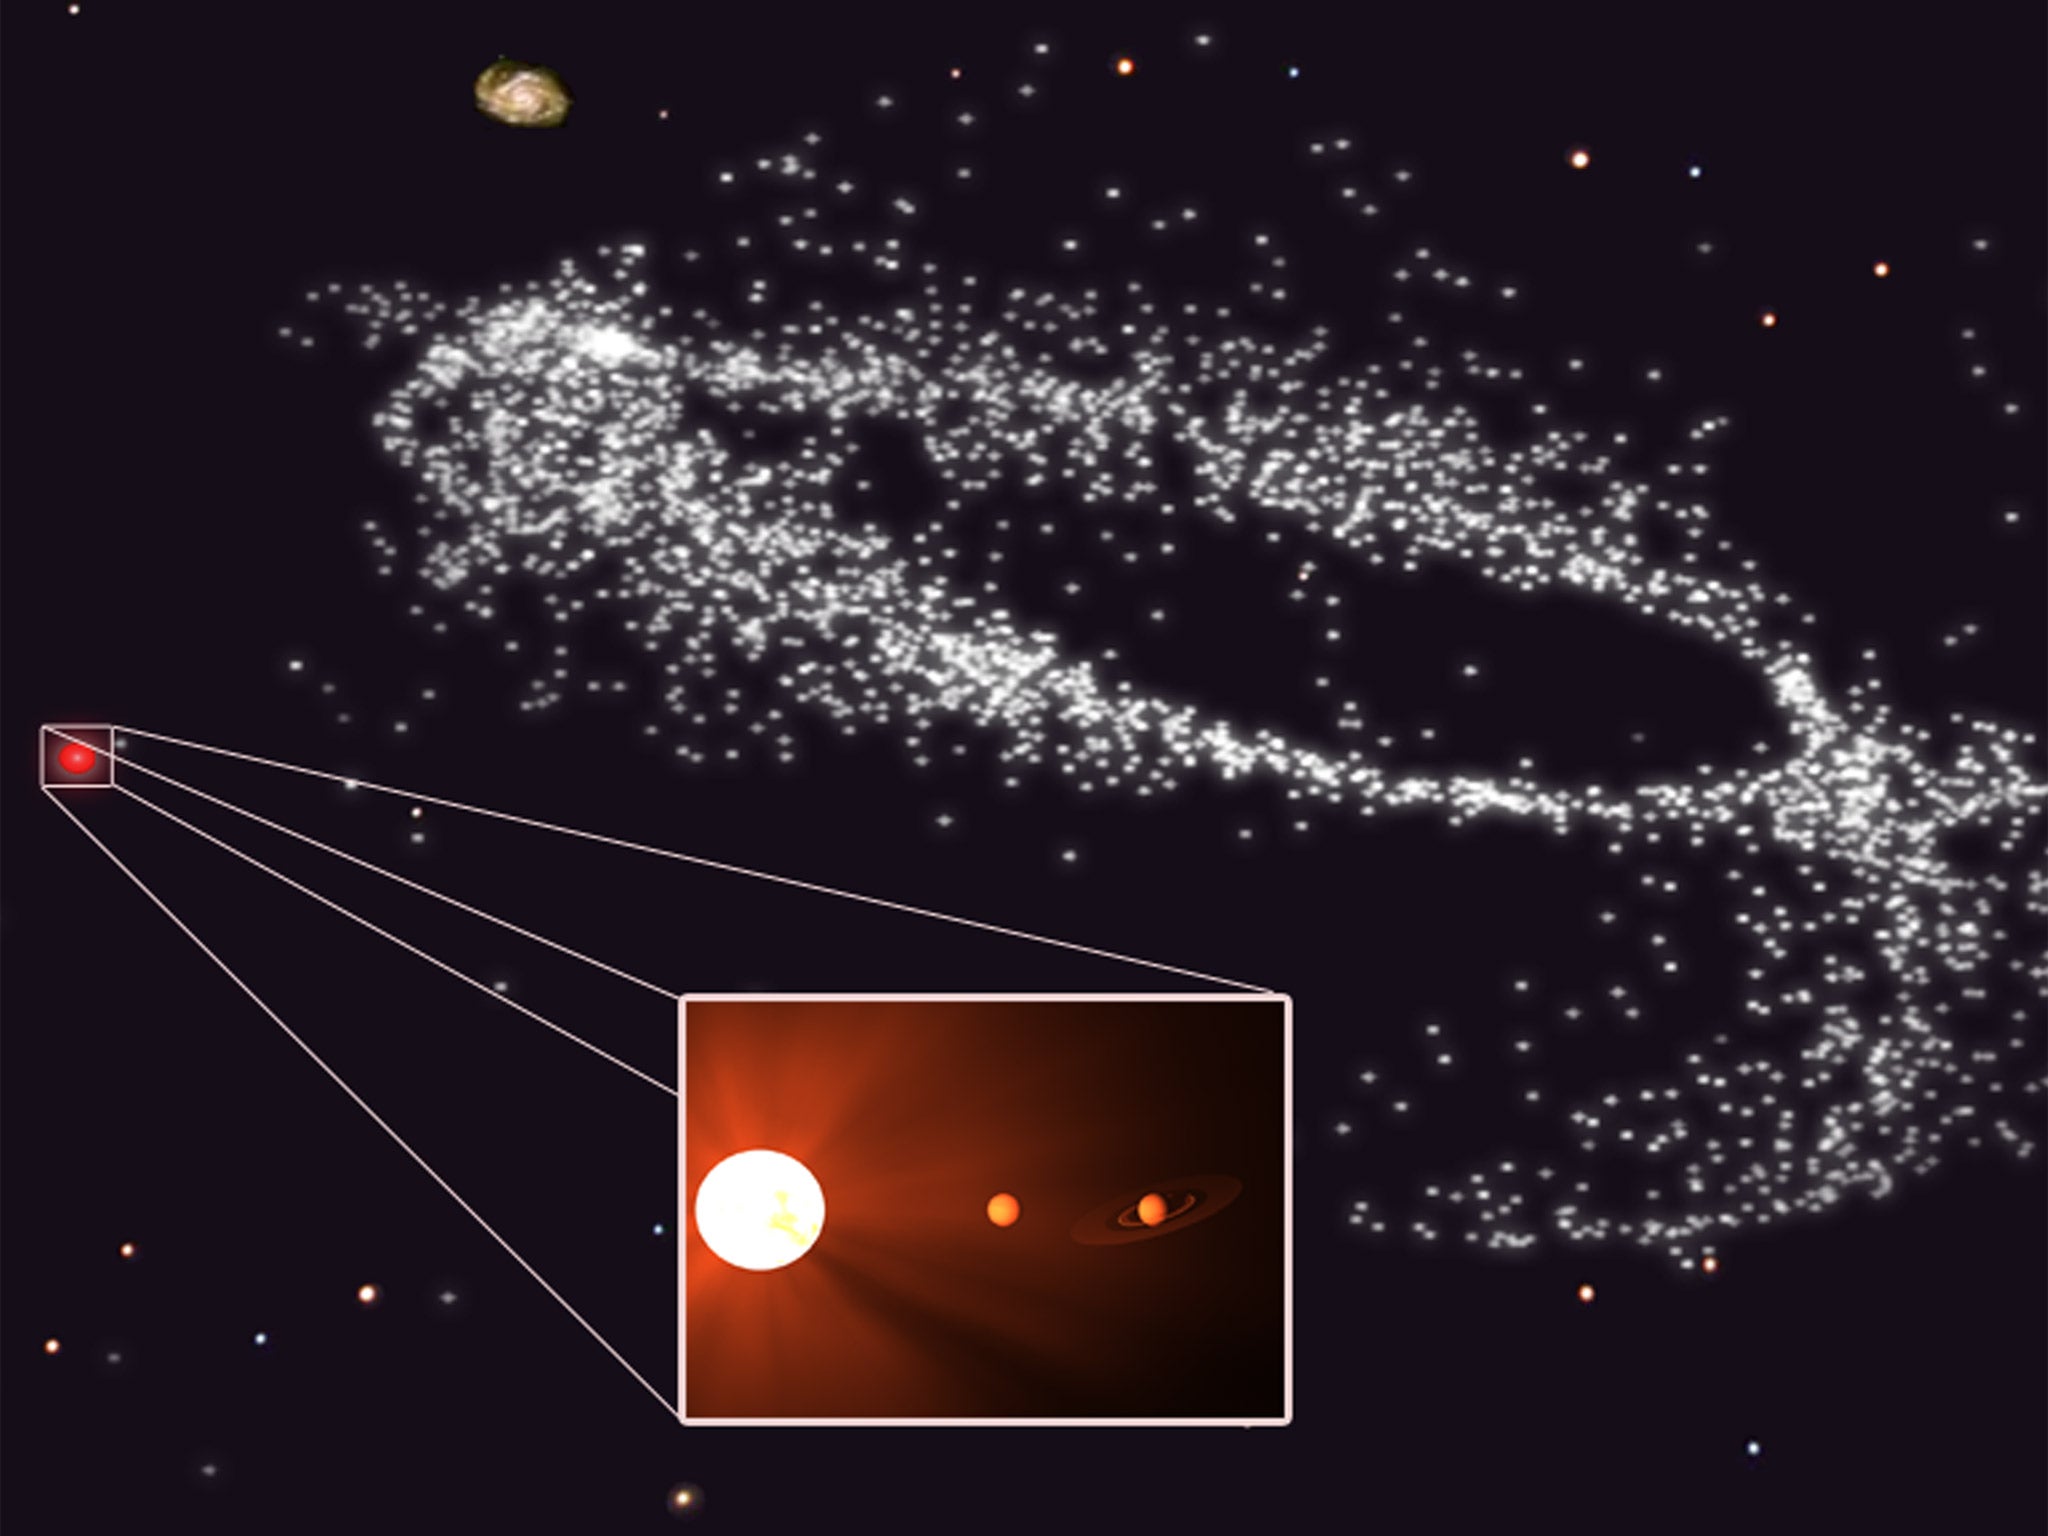 Kapteyn's star and its planets likely come from a dwarf galaxy now merged with the Milky Way